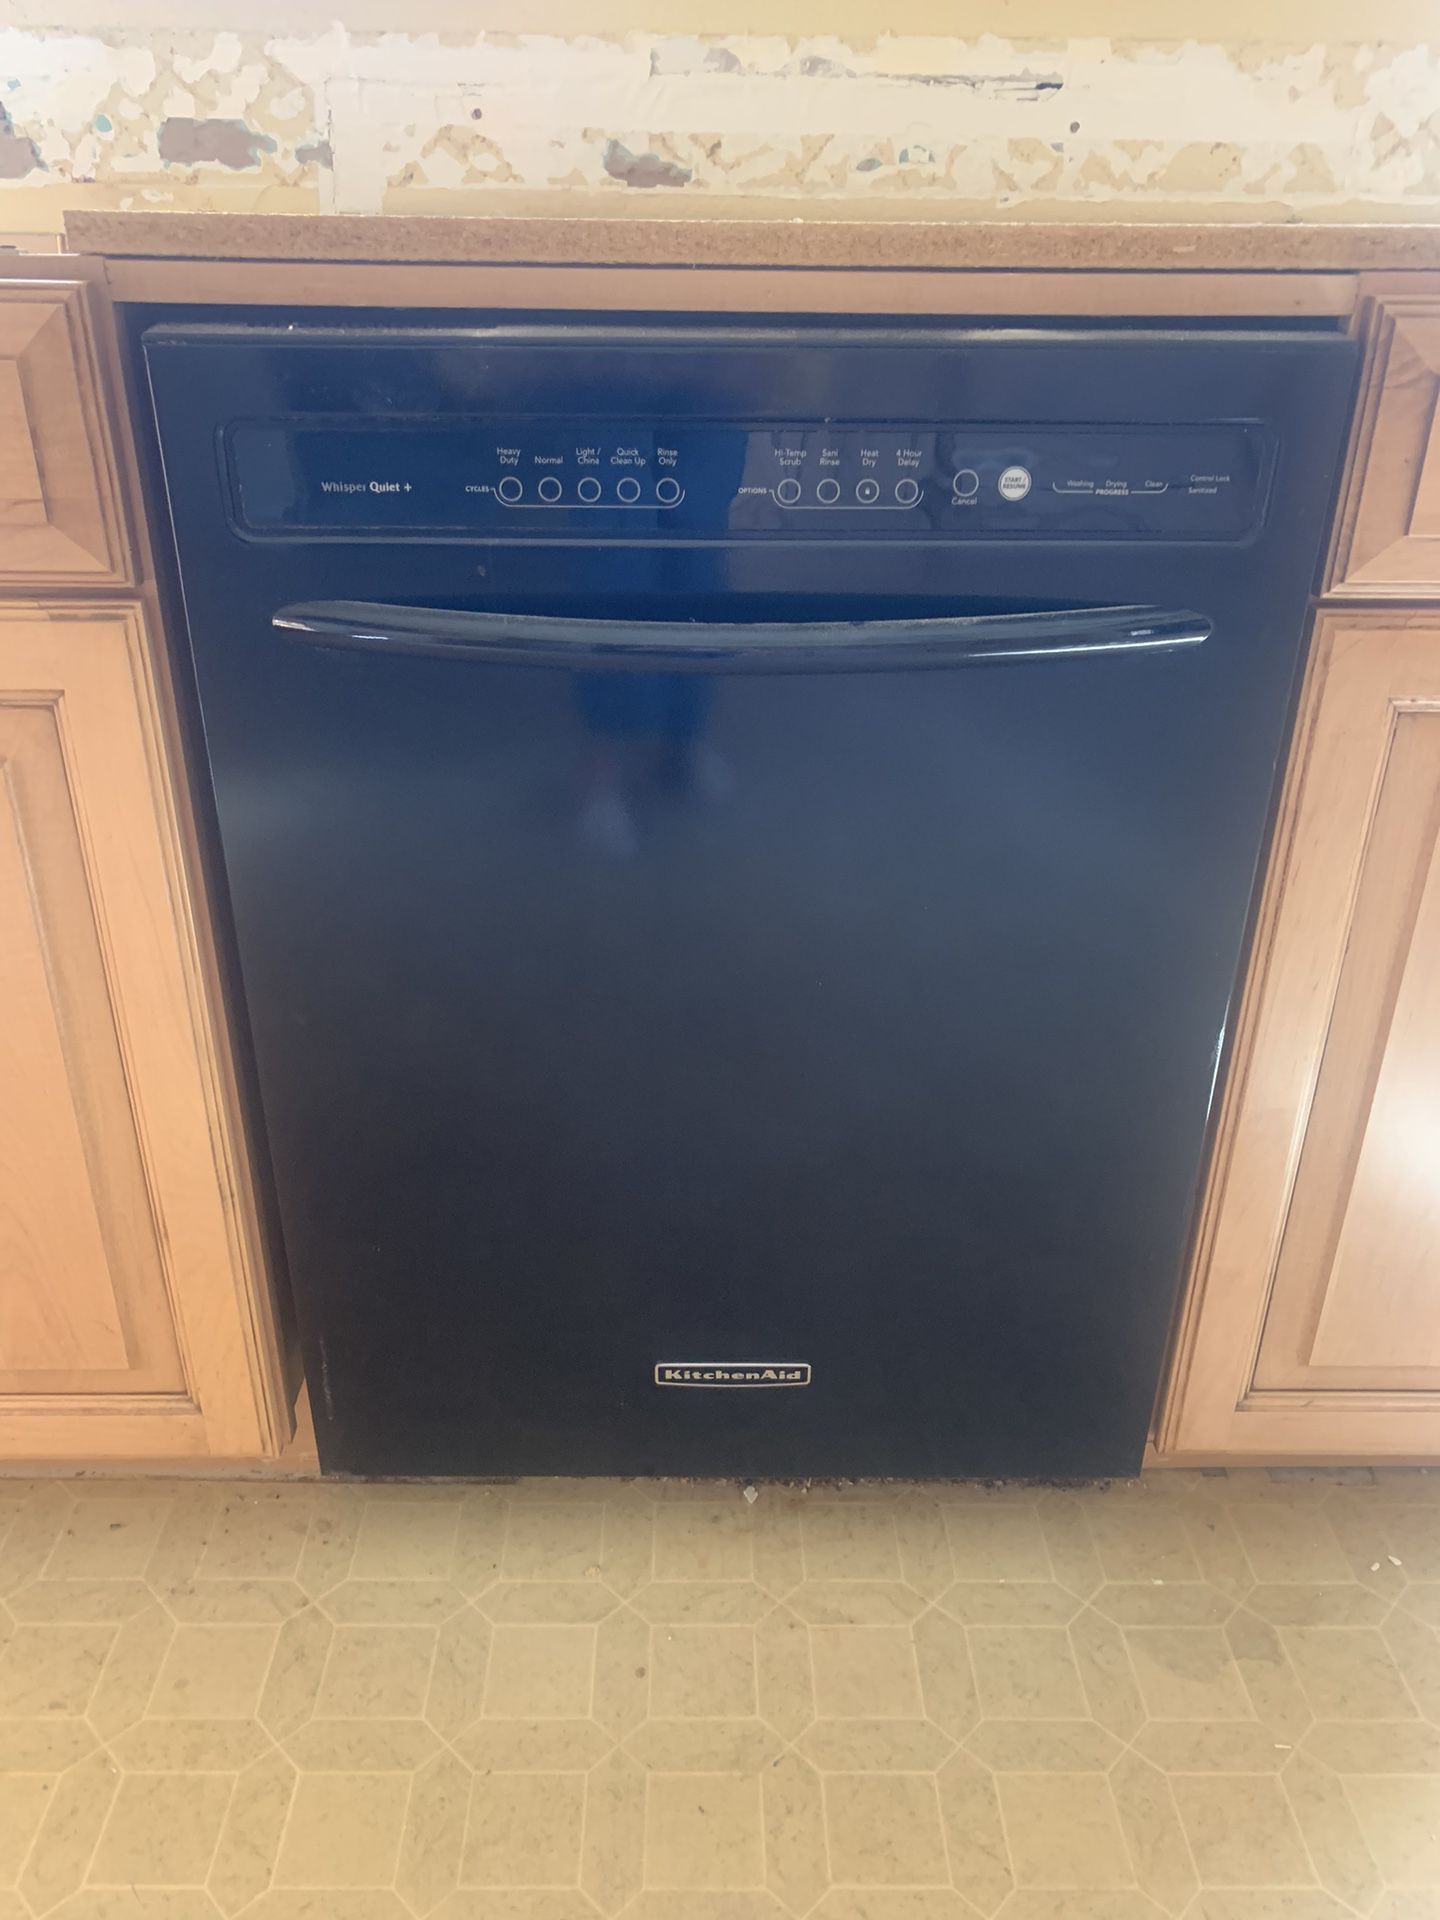 Appliances for sale… Black dishwasher and microwave